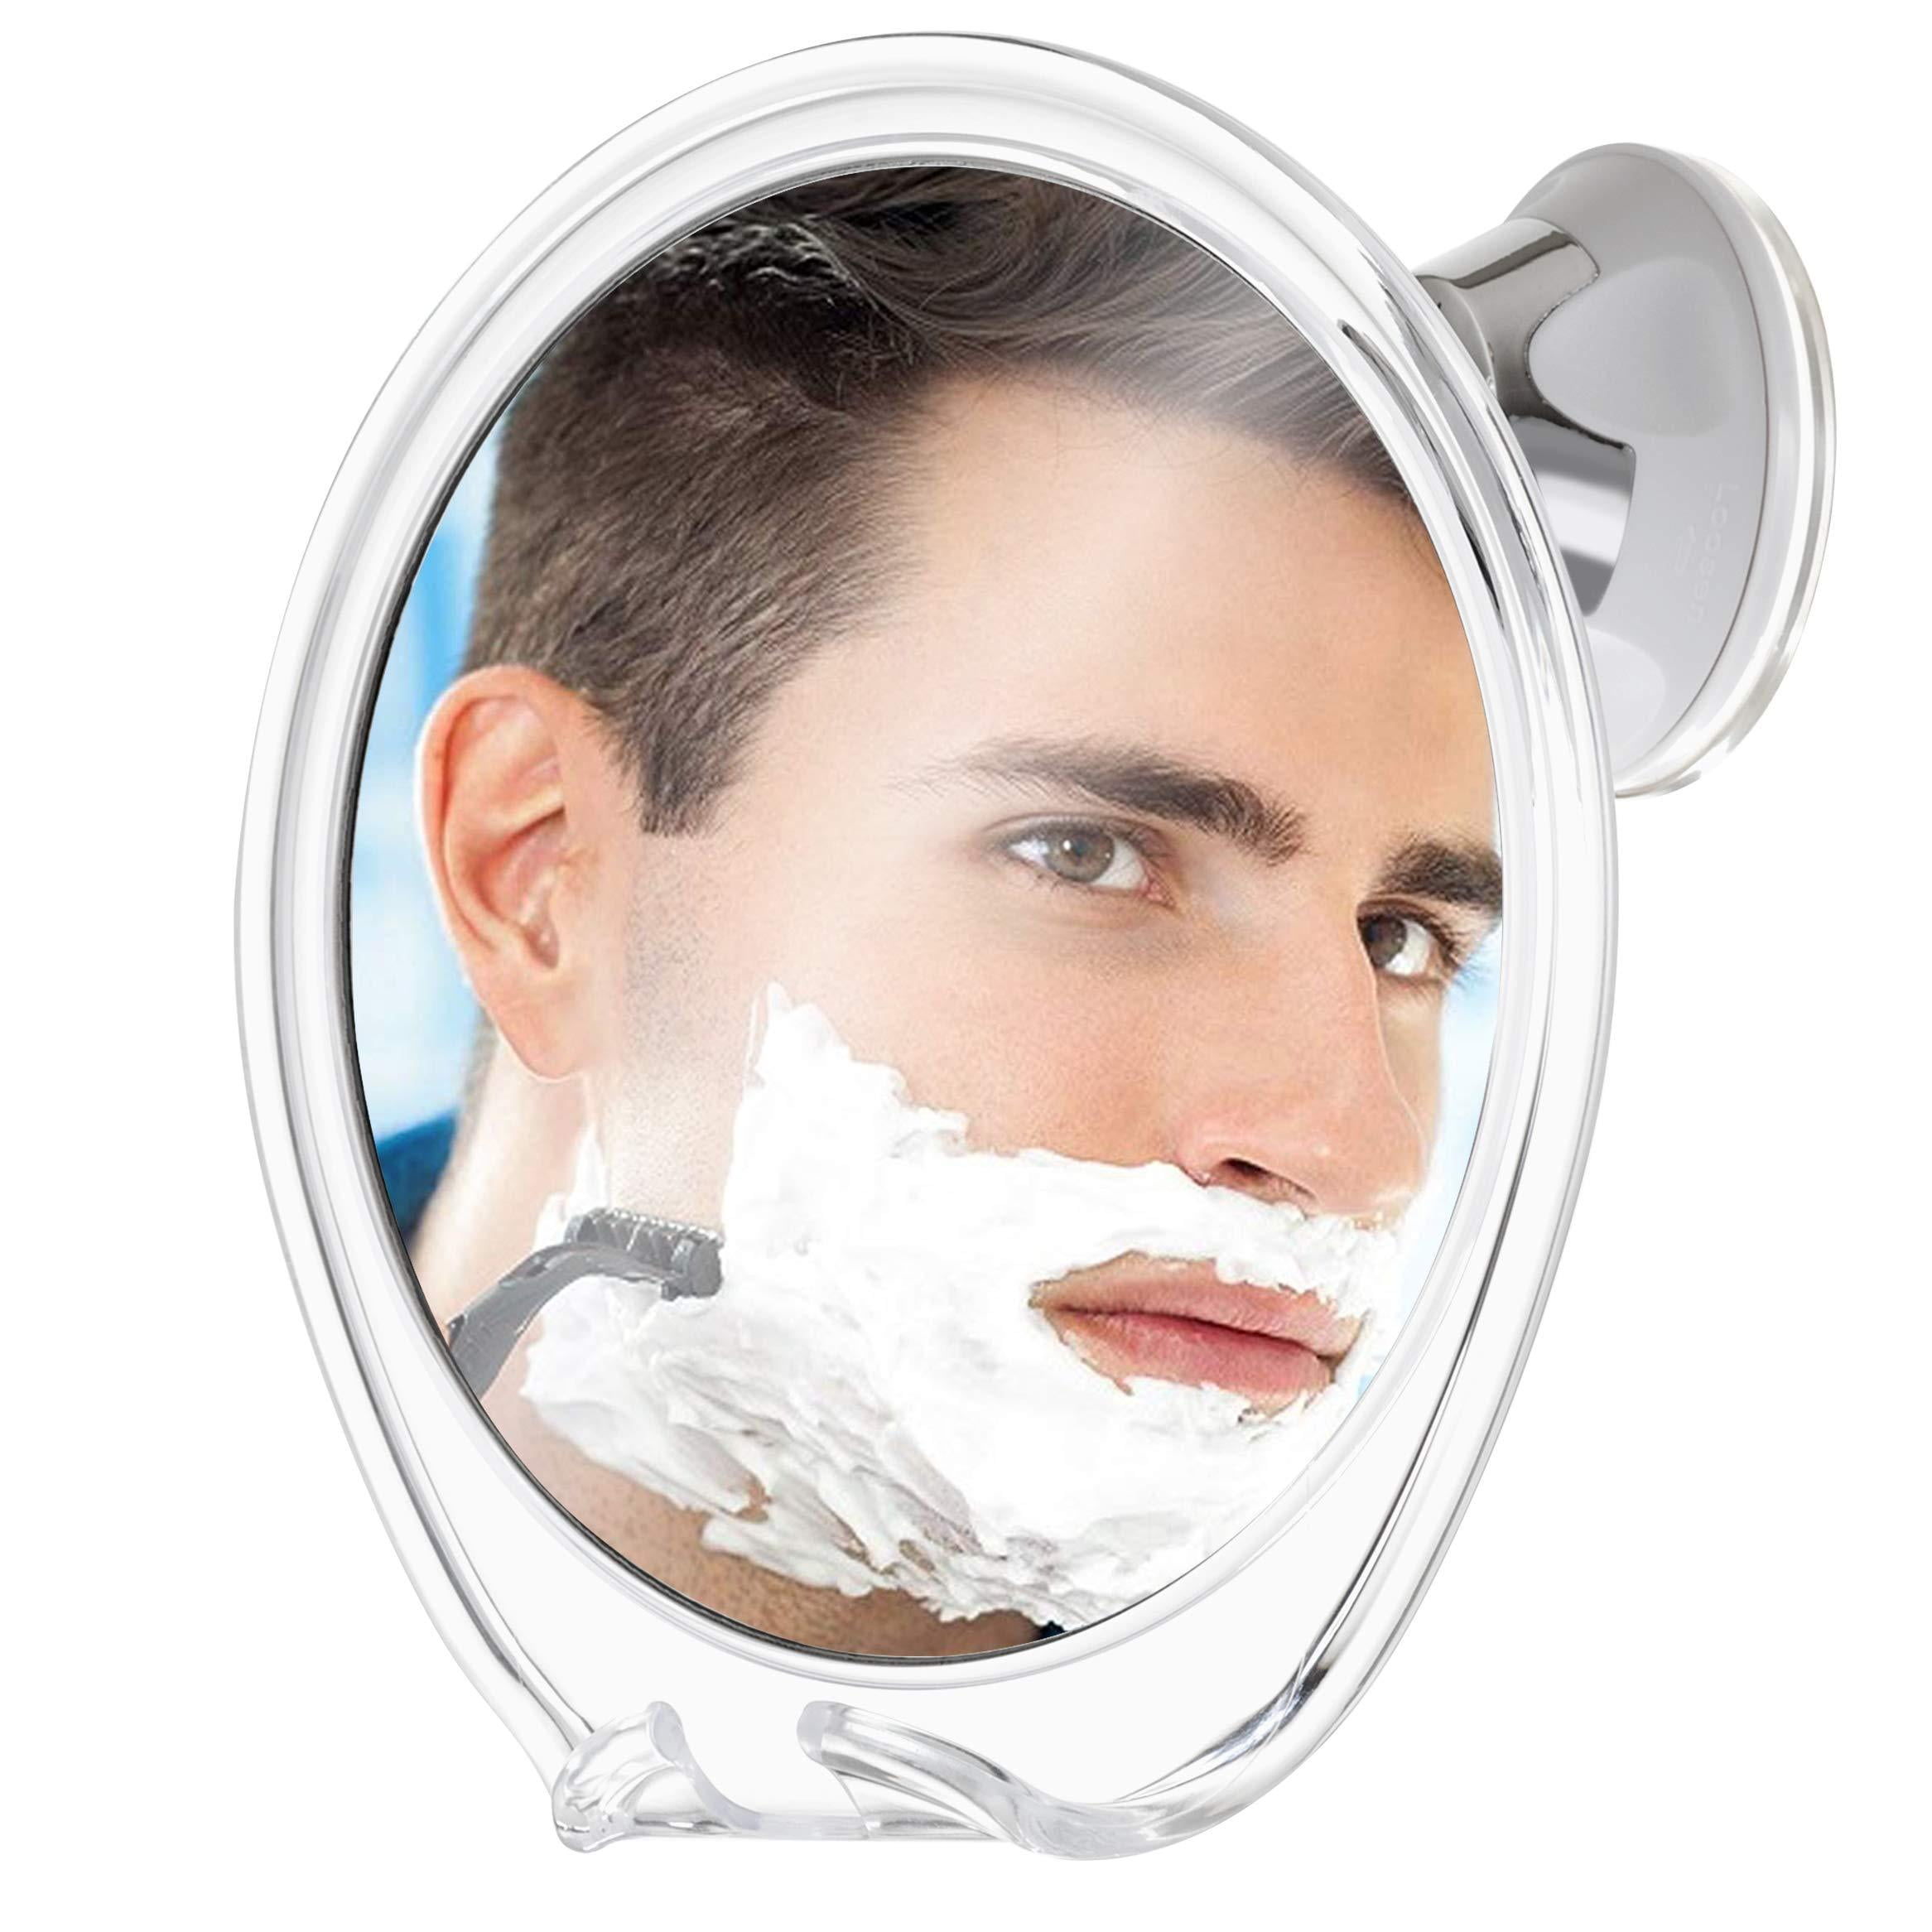 X LARGE Shower Shaving Mirror,Strong Safe Shatter Proof,Travel.Camping FREE Hook 